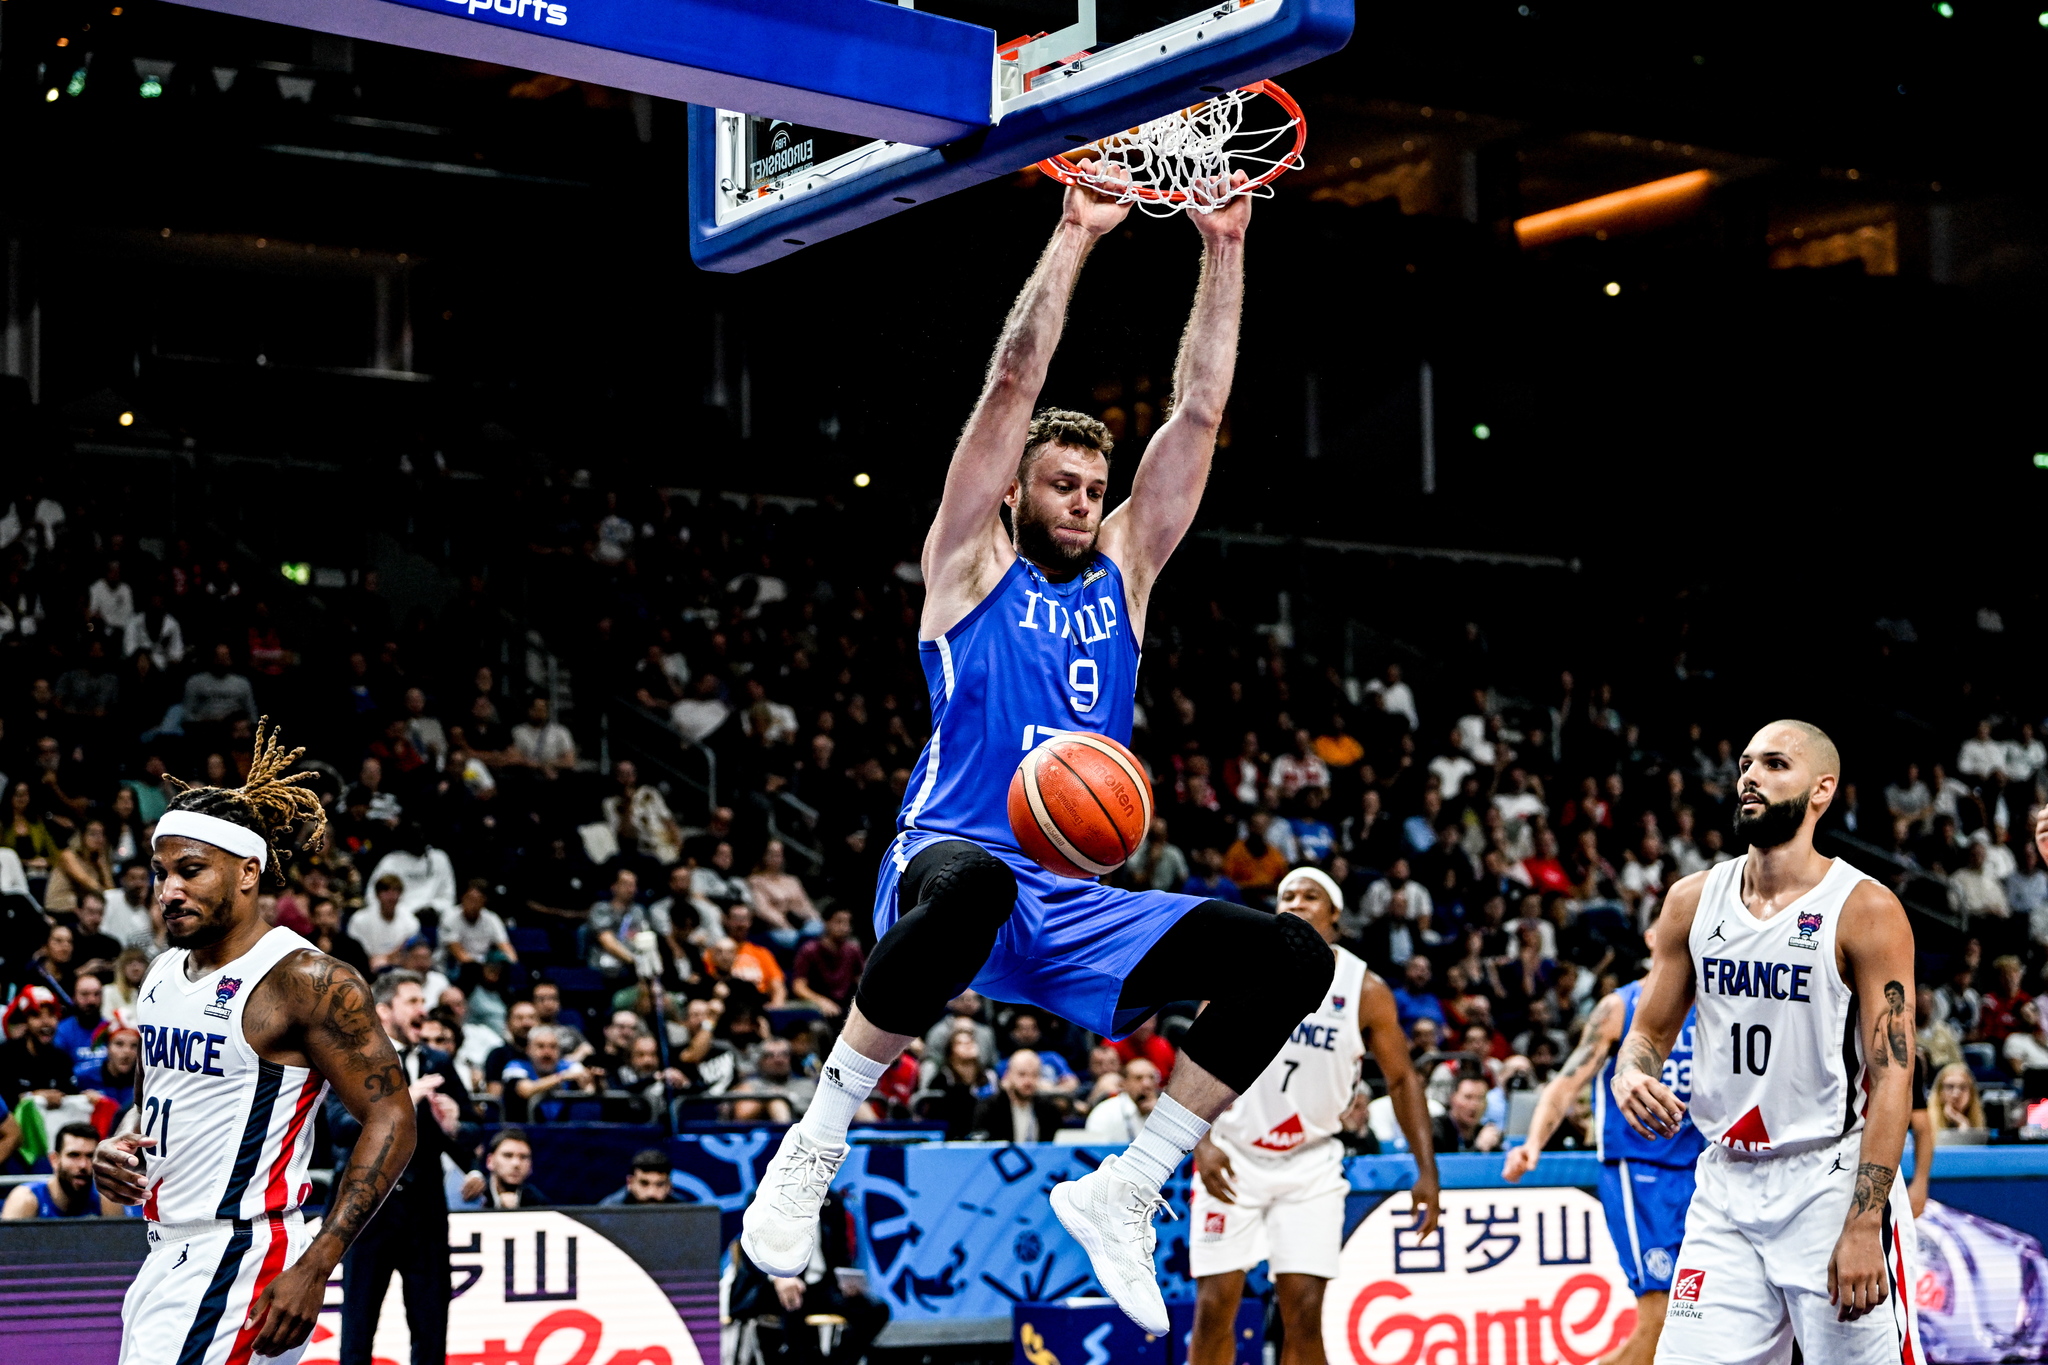  lt;HIT gt;Berlin lt;/HIT gt; (Germany), 14/09/2022.- Nicolo Melli of Italy in action during the FIBA EuroBasket 2022 Quarter Finals match between Italy and France at EuroBasket Arena in  lt;HIT gt;Berlin lt;/HIT gt;, Germany, 14 September 2022. (Baloncesto, Francia, Alemania, Italia) EFE/EPA/FILIP SINGER